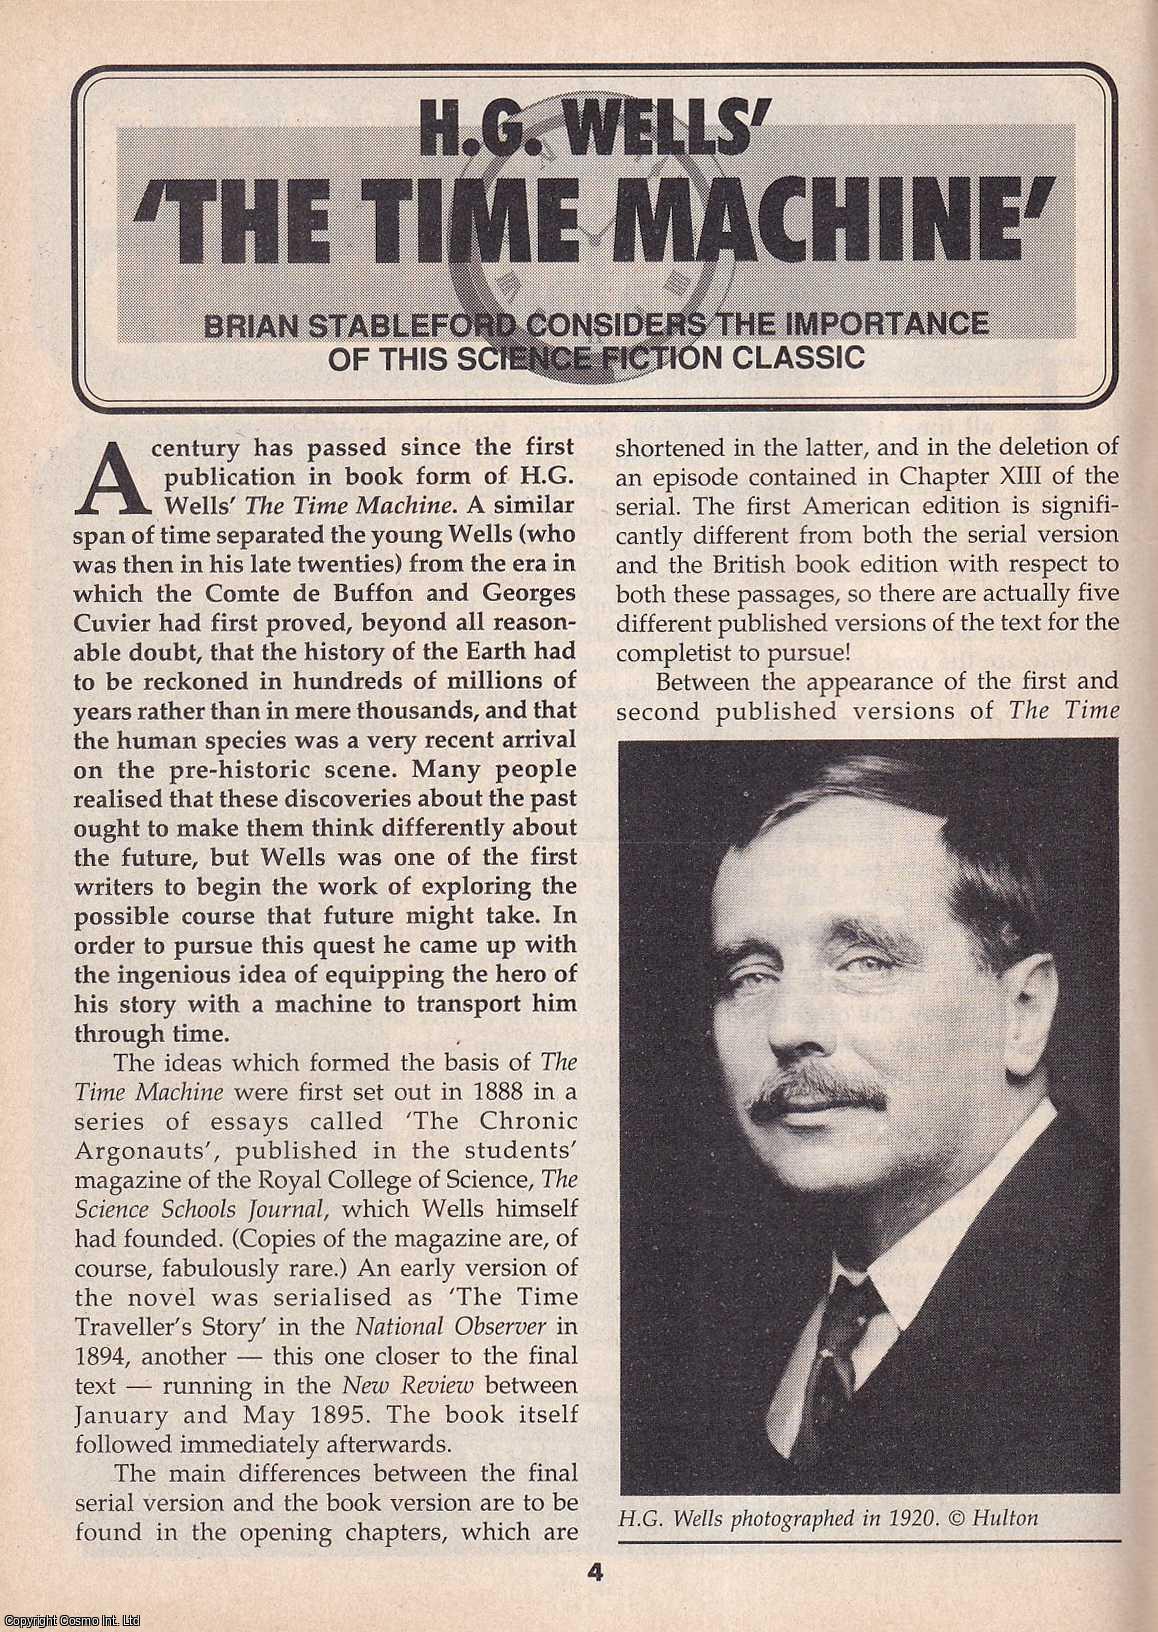 Brian Stableford - Herbert George Wells The Time Machine : Science Fiction Classic. This is an original article separated from an issue of The Book & Magazine Collector publication.